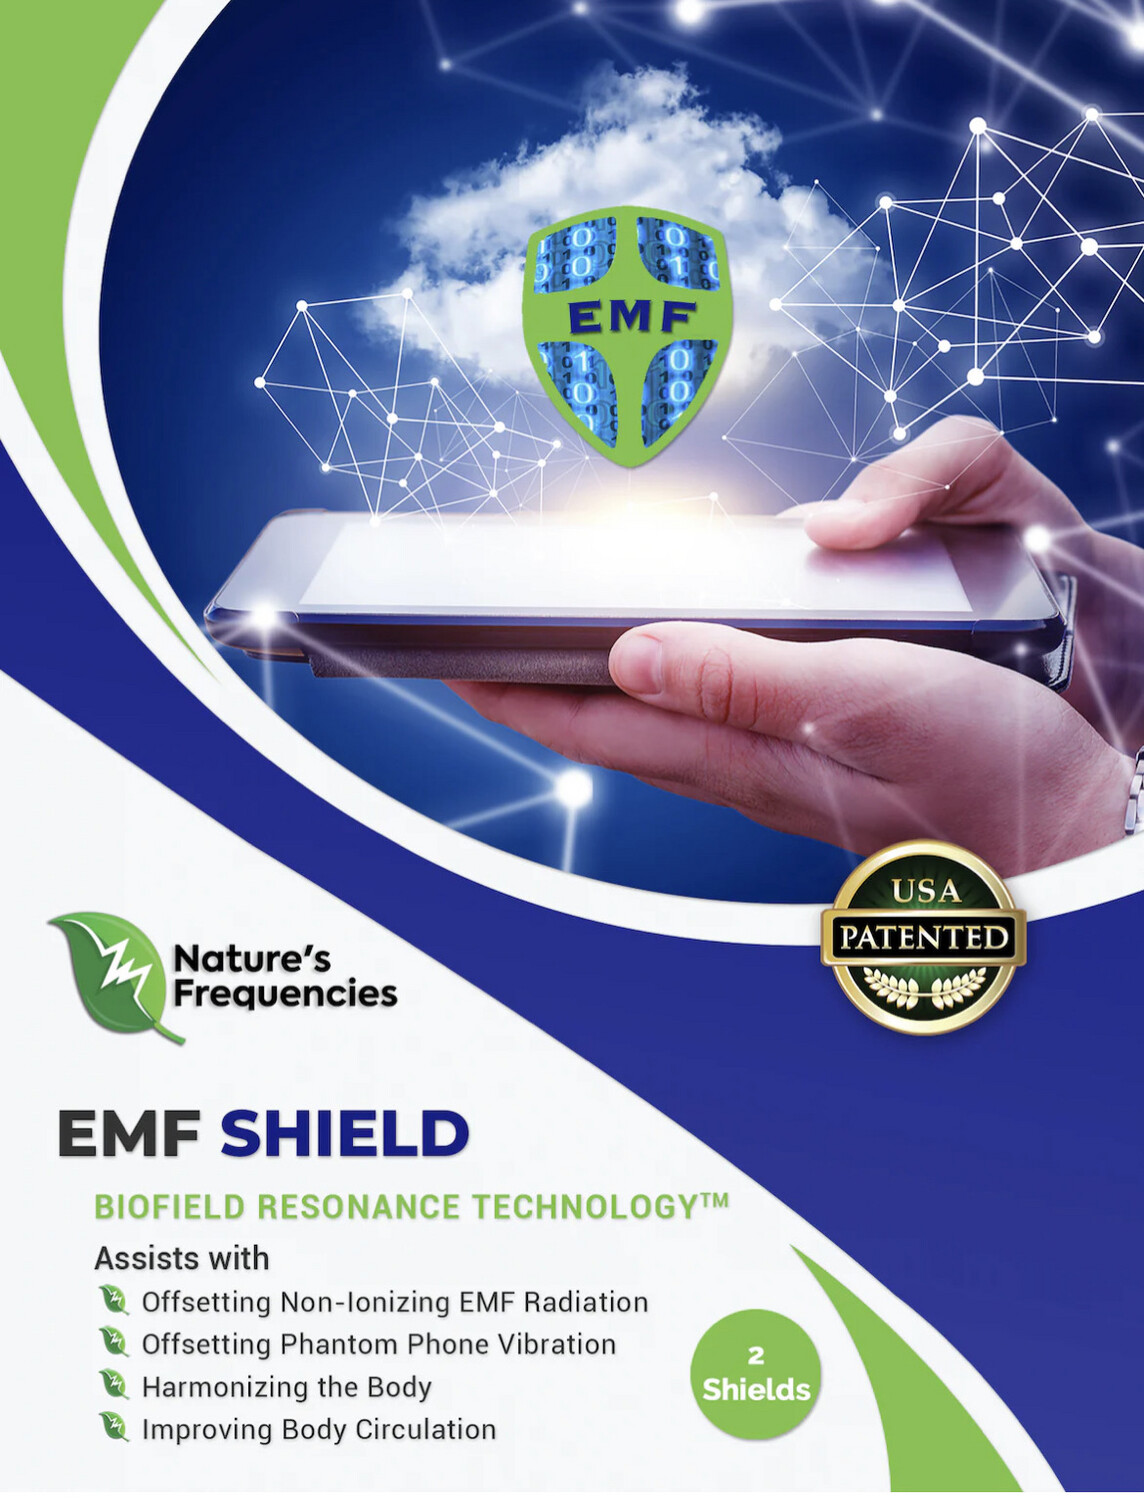 Natures Frequenices EMF Shield 4Shields